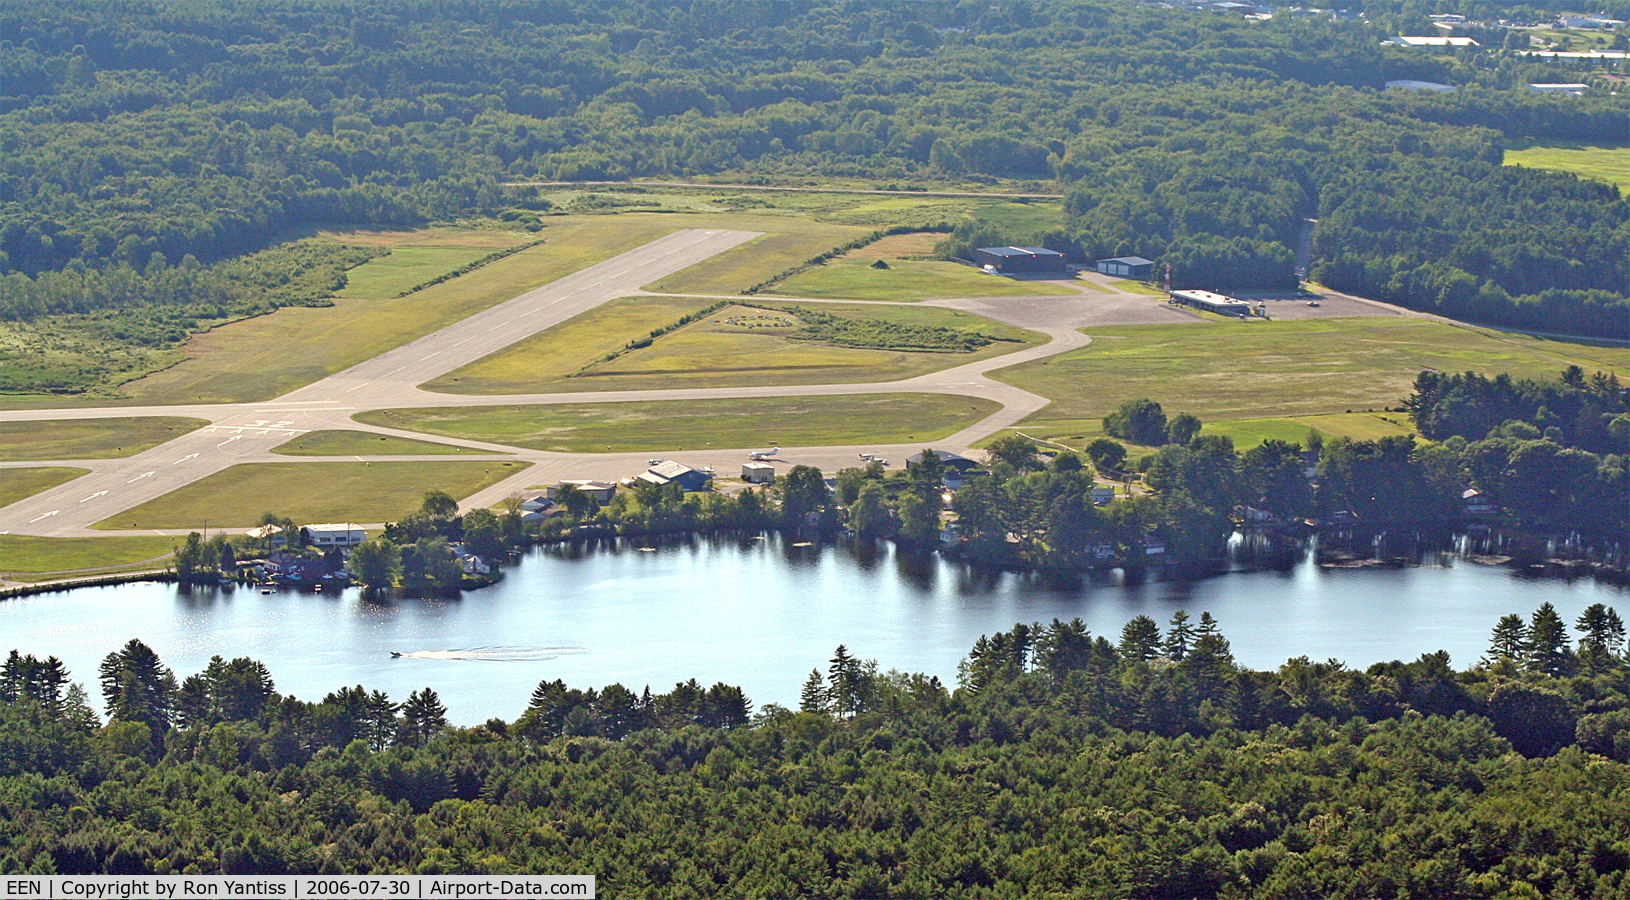 Dillant-hopkins Airport (EEN) - Looking west from North Swanzey to Wilson Pond and Dillant-Hopkins Airport. Altitude 2,000 feet.